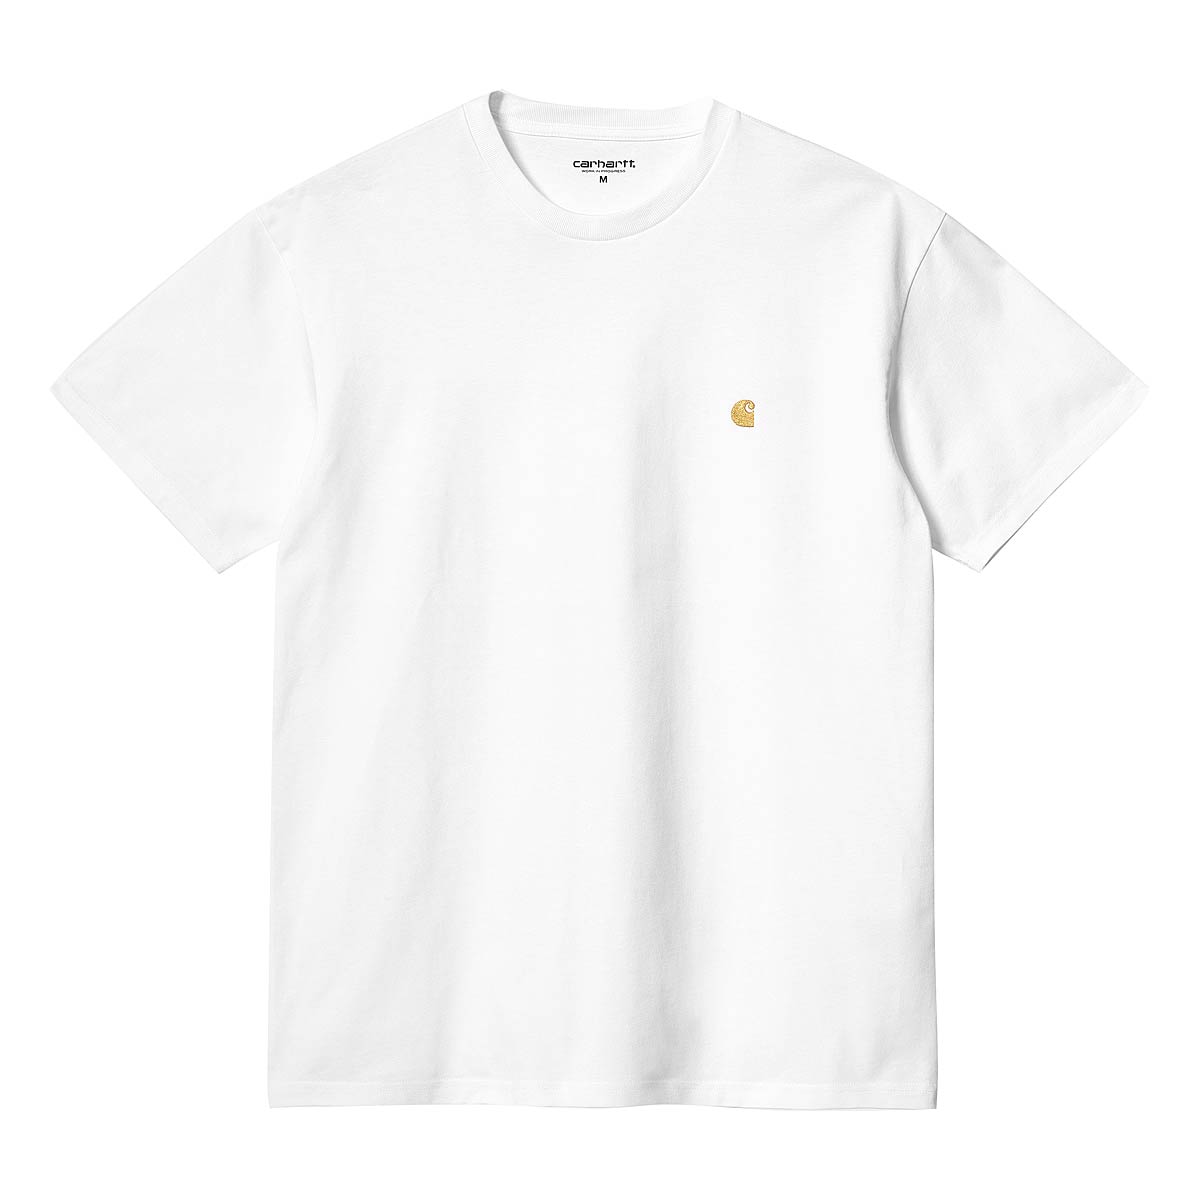 Carhartt Wip Chase T-shirt, White / Gold